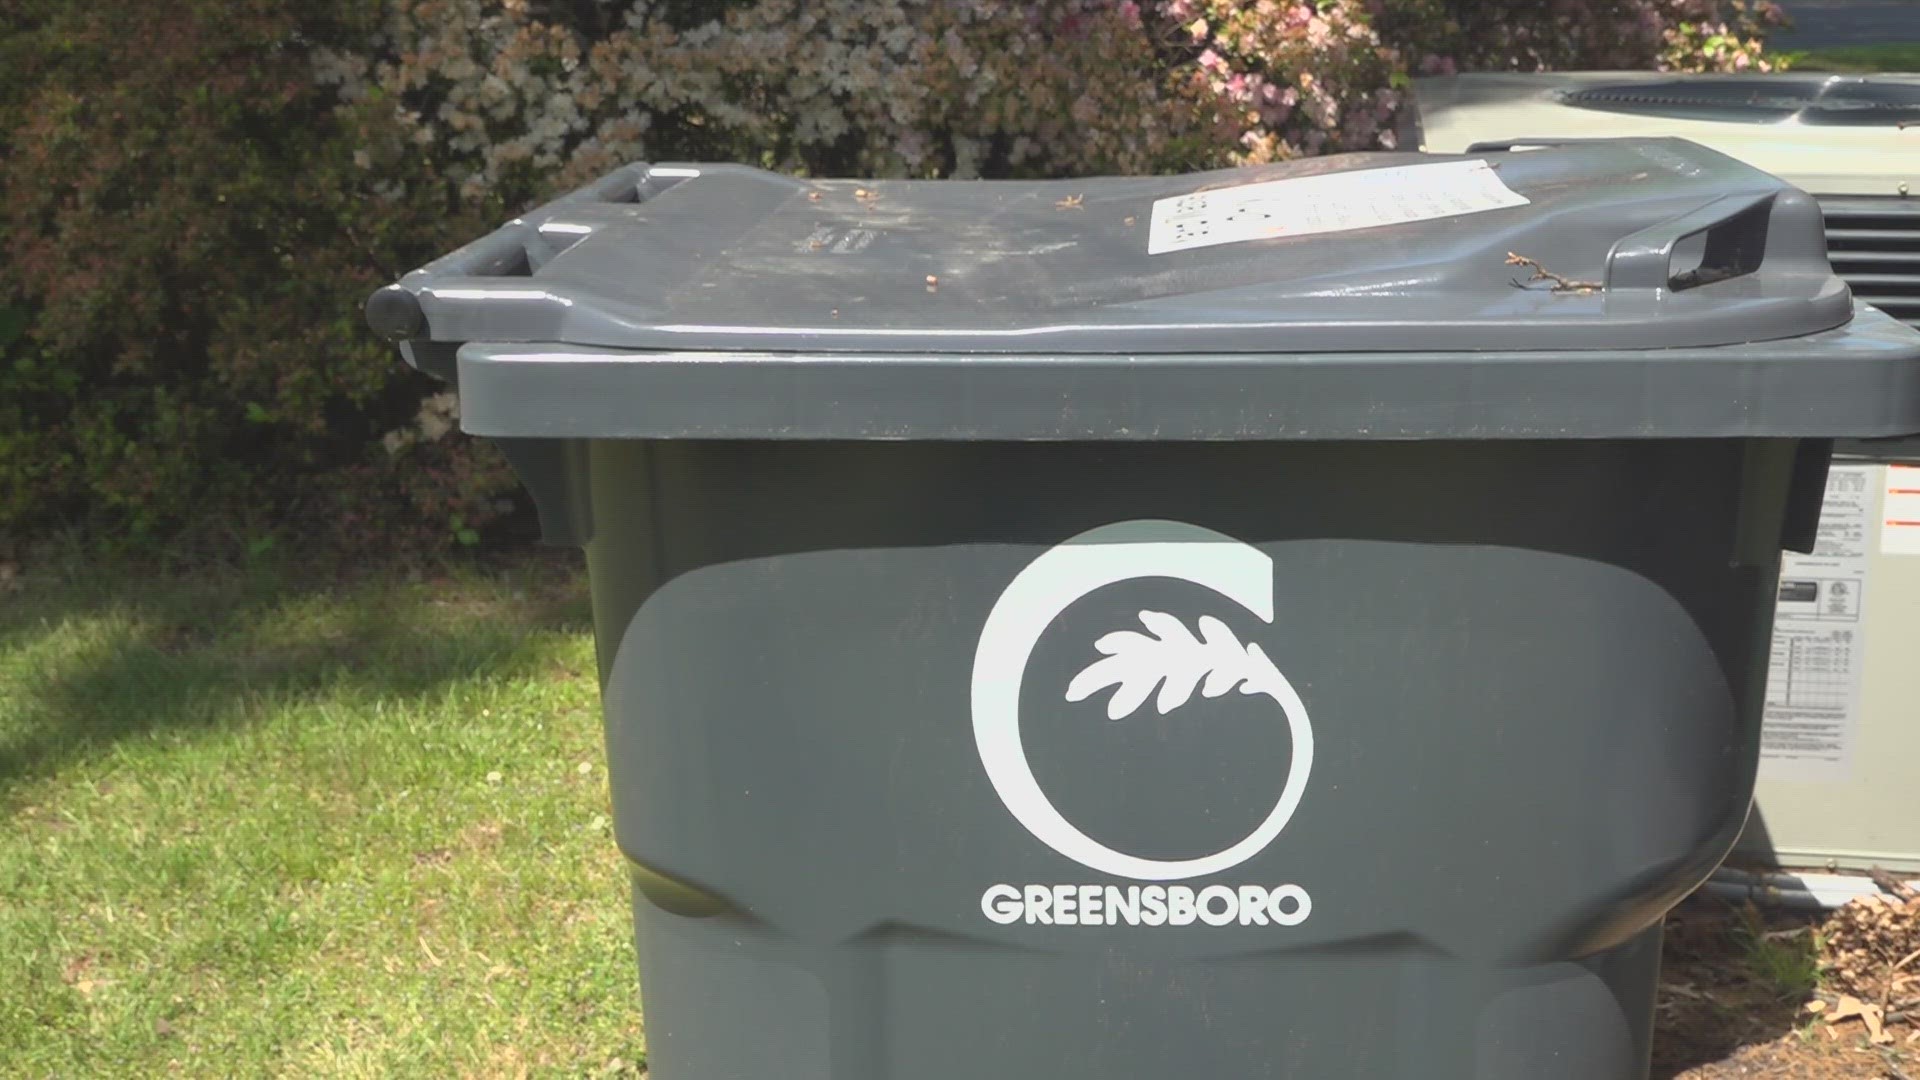 Crews with the City of Greensboro are dropping off new yard waste containers with new requirements.